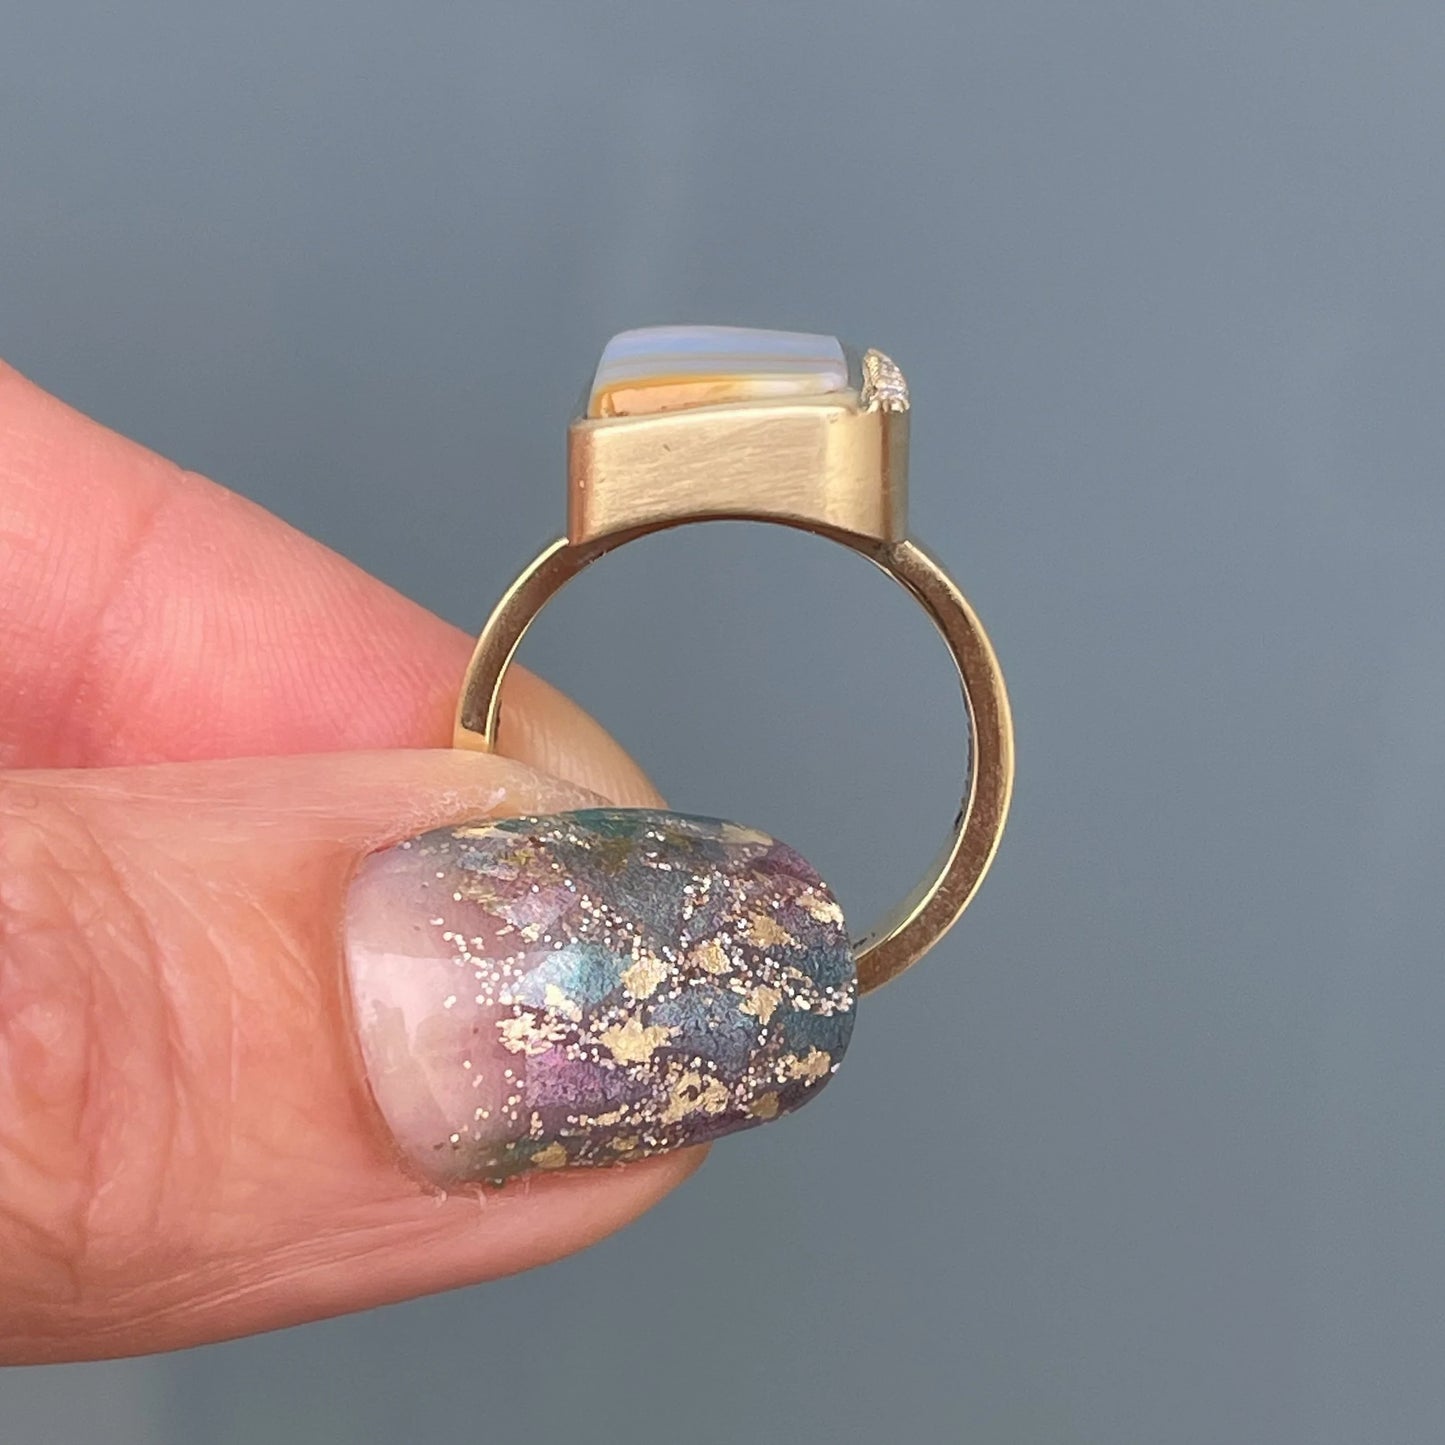 An Australian Opal Ring by NIXIN set in 14k yellow gold held to show side view.